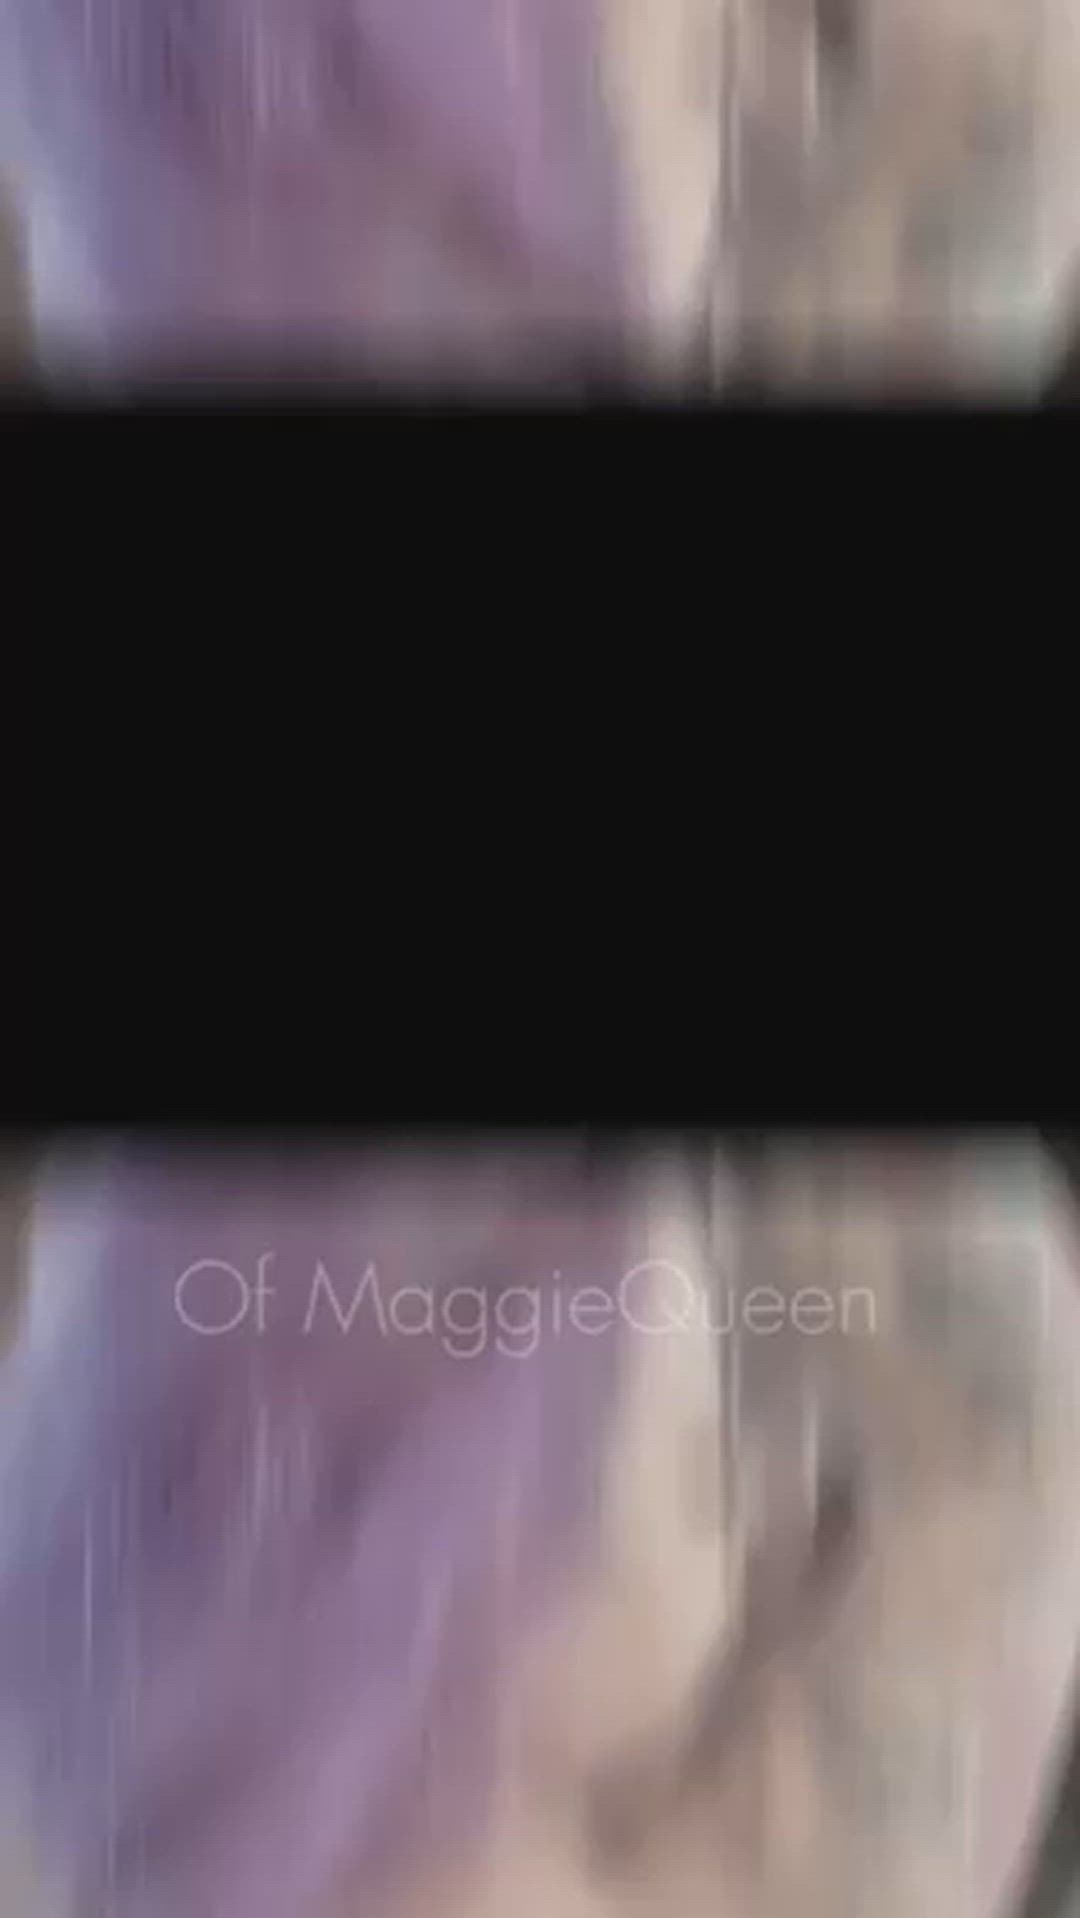 Ass porn video with onlyfans model Maggie Queen <strong>@maggiequeen</strong>